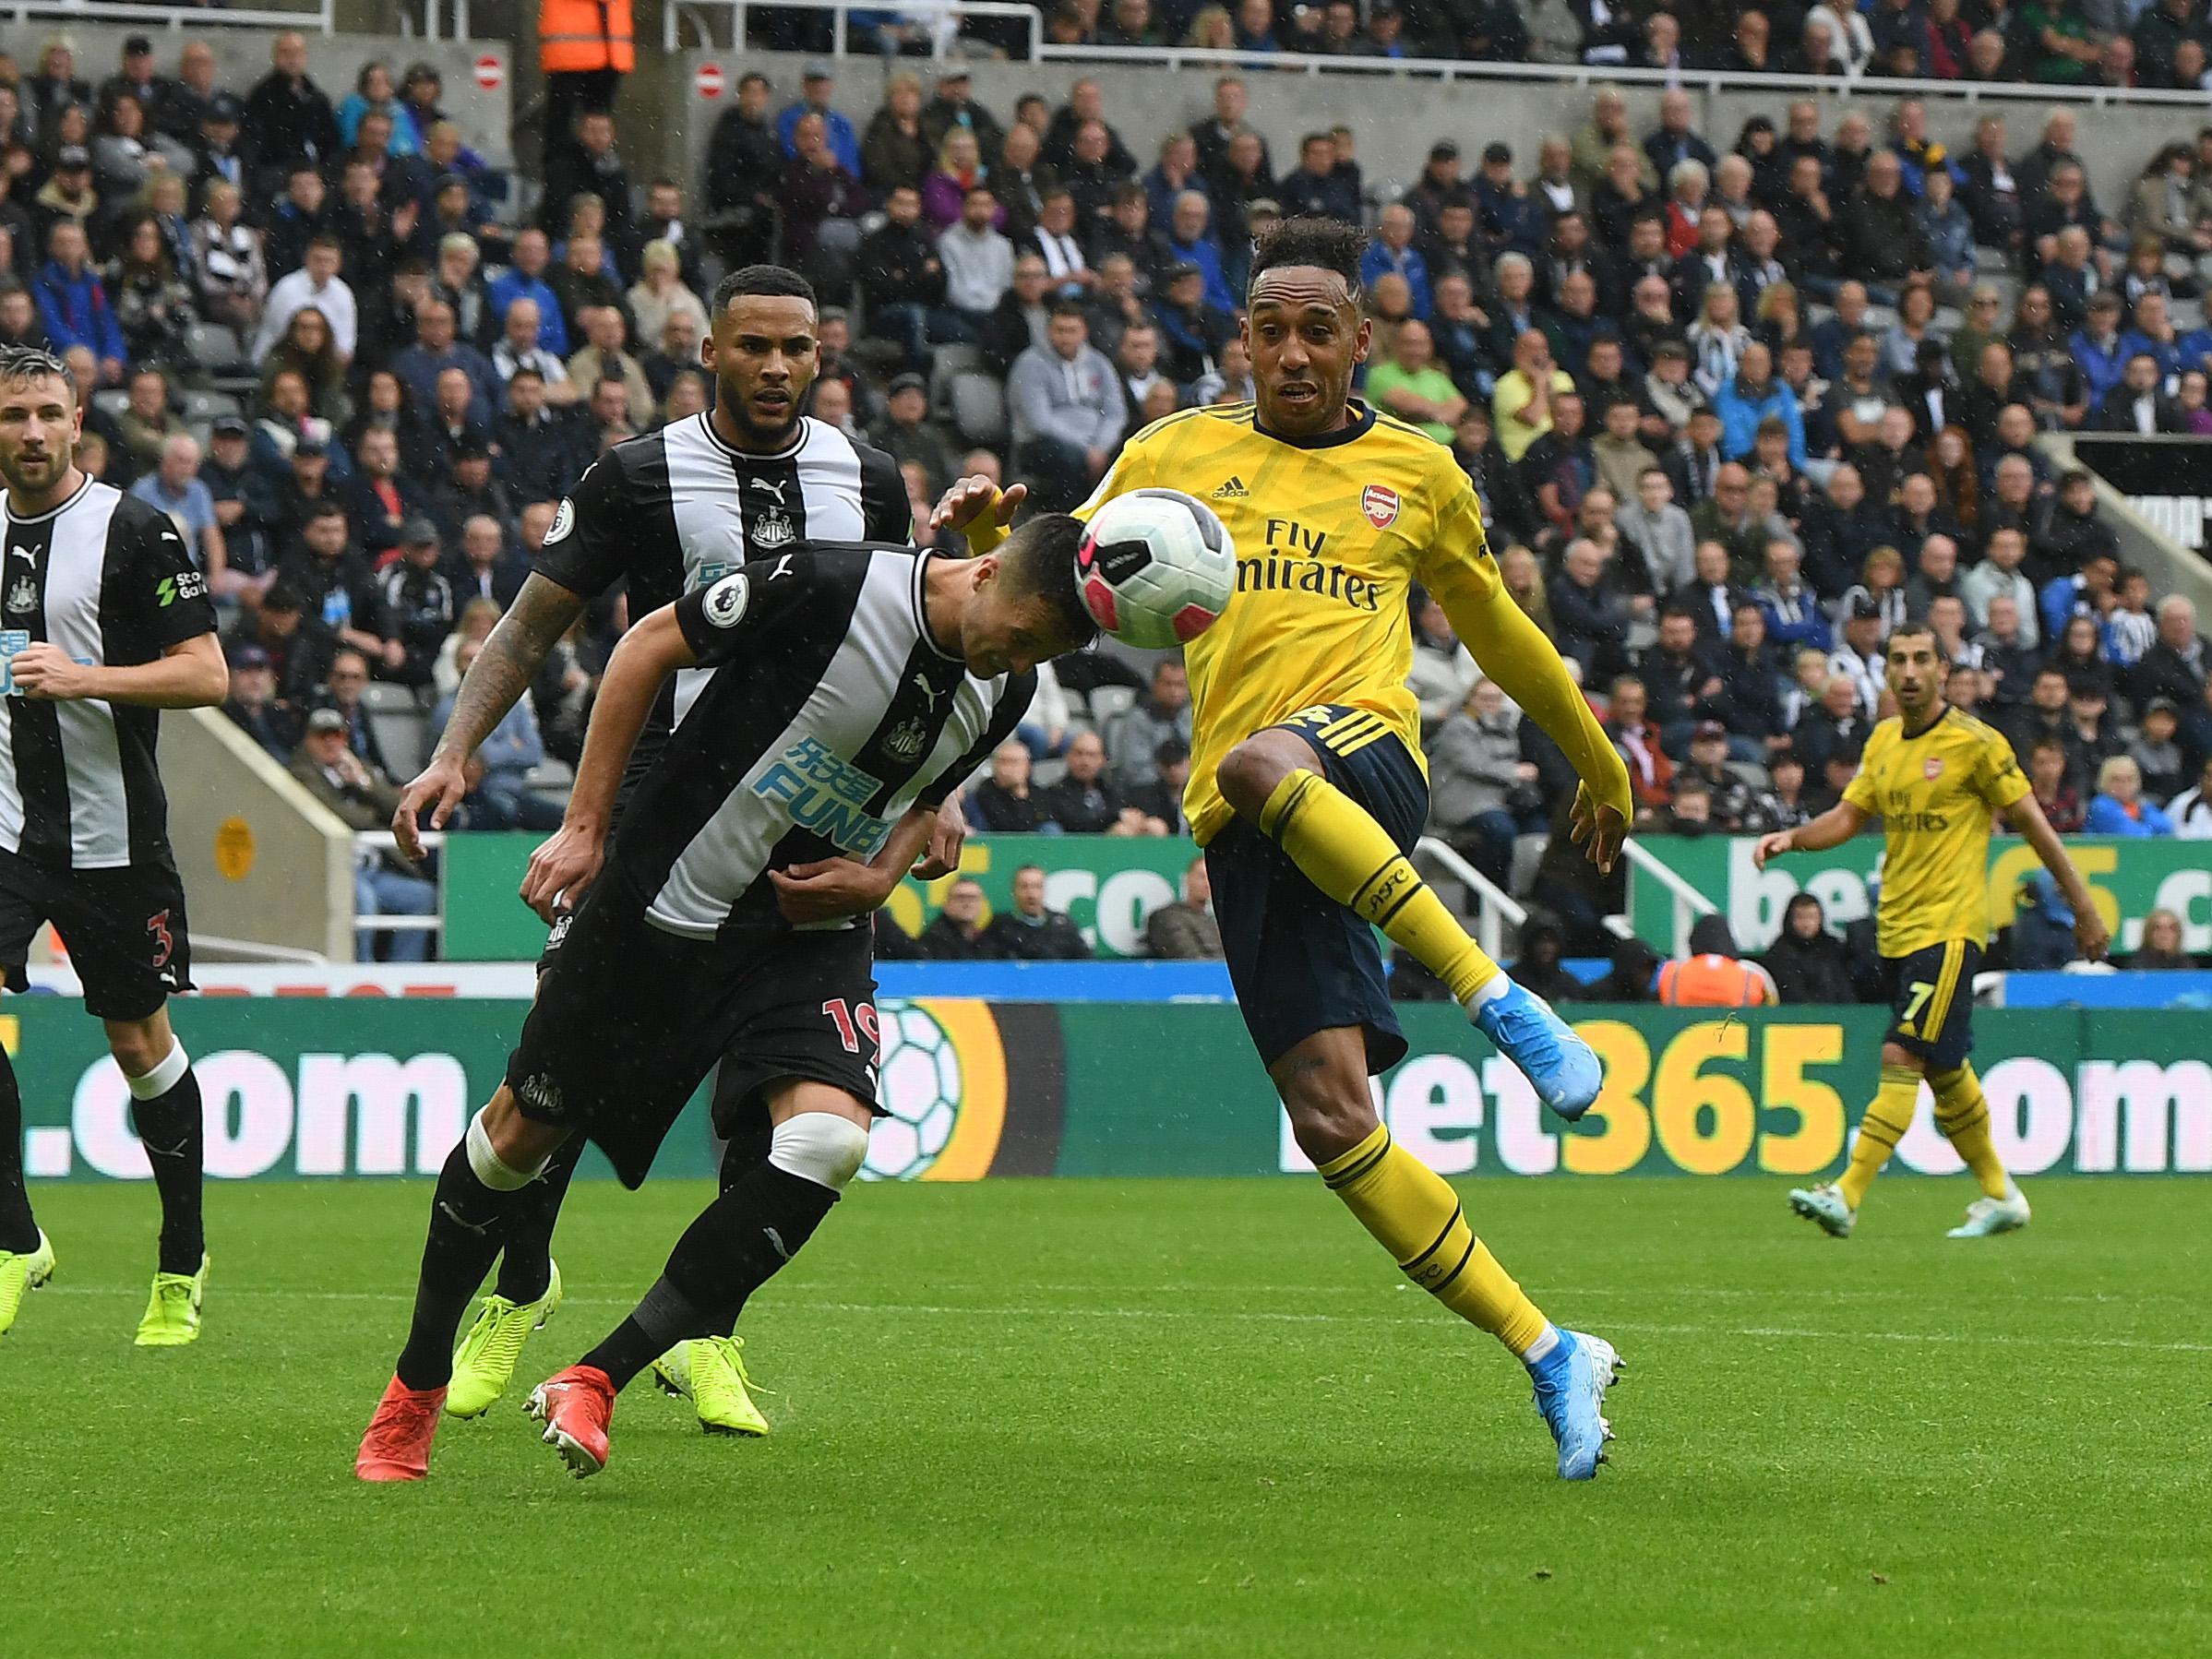 Newcastle and Arsenal meet on Sunday in a mid-table battle